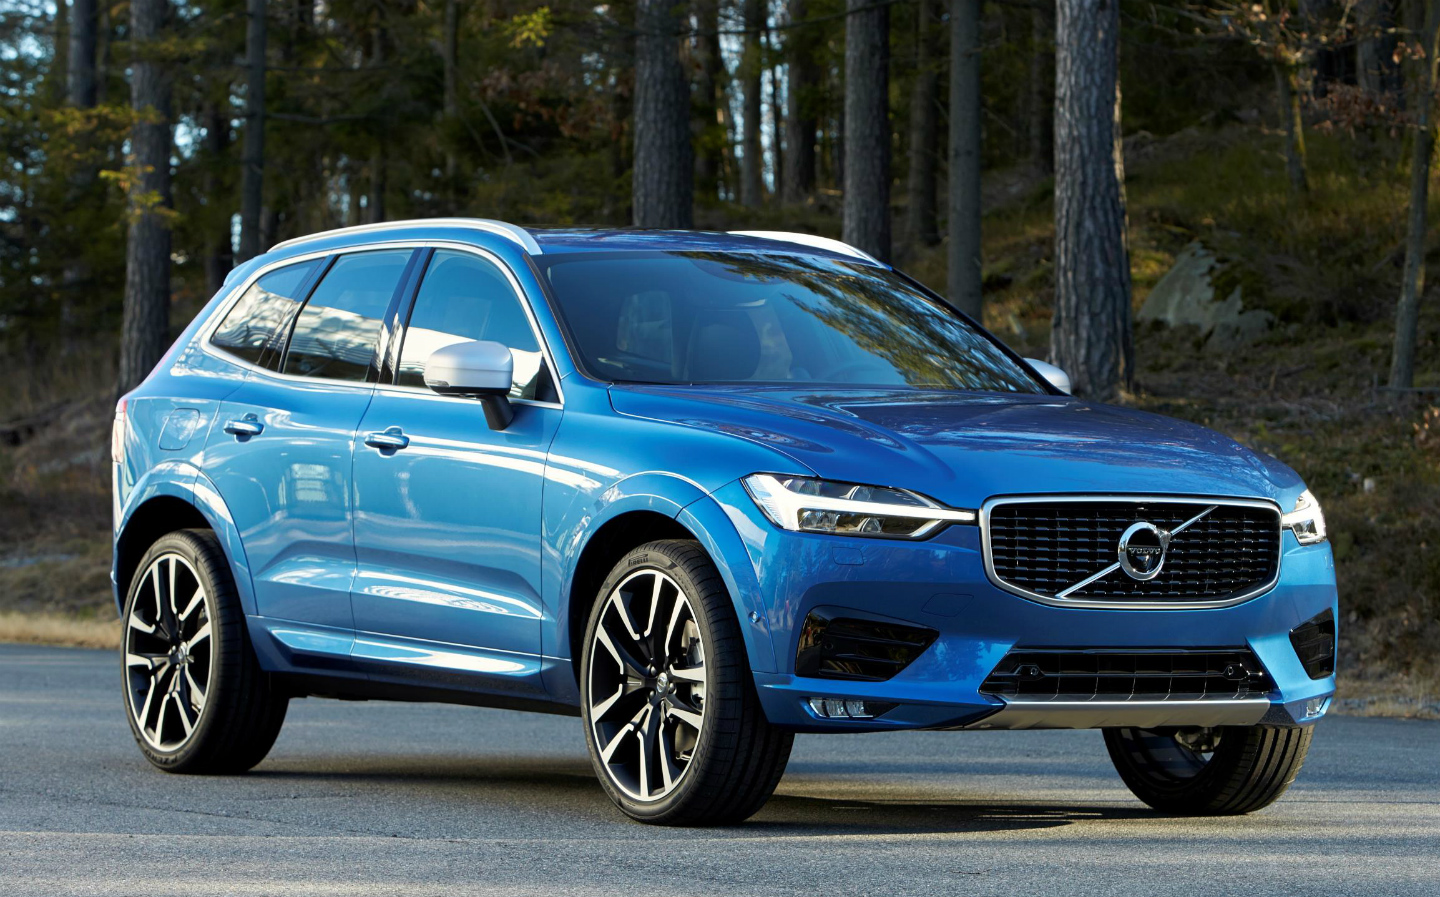 2017 Volvo XC60: new look for Scandi-chic SUV